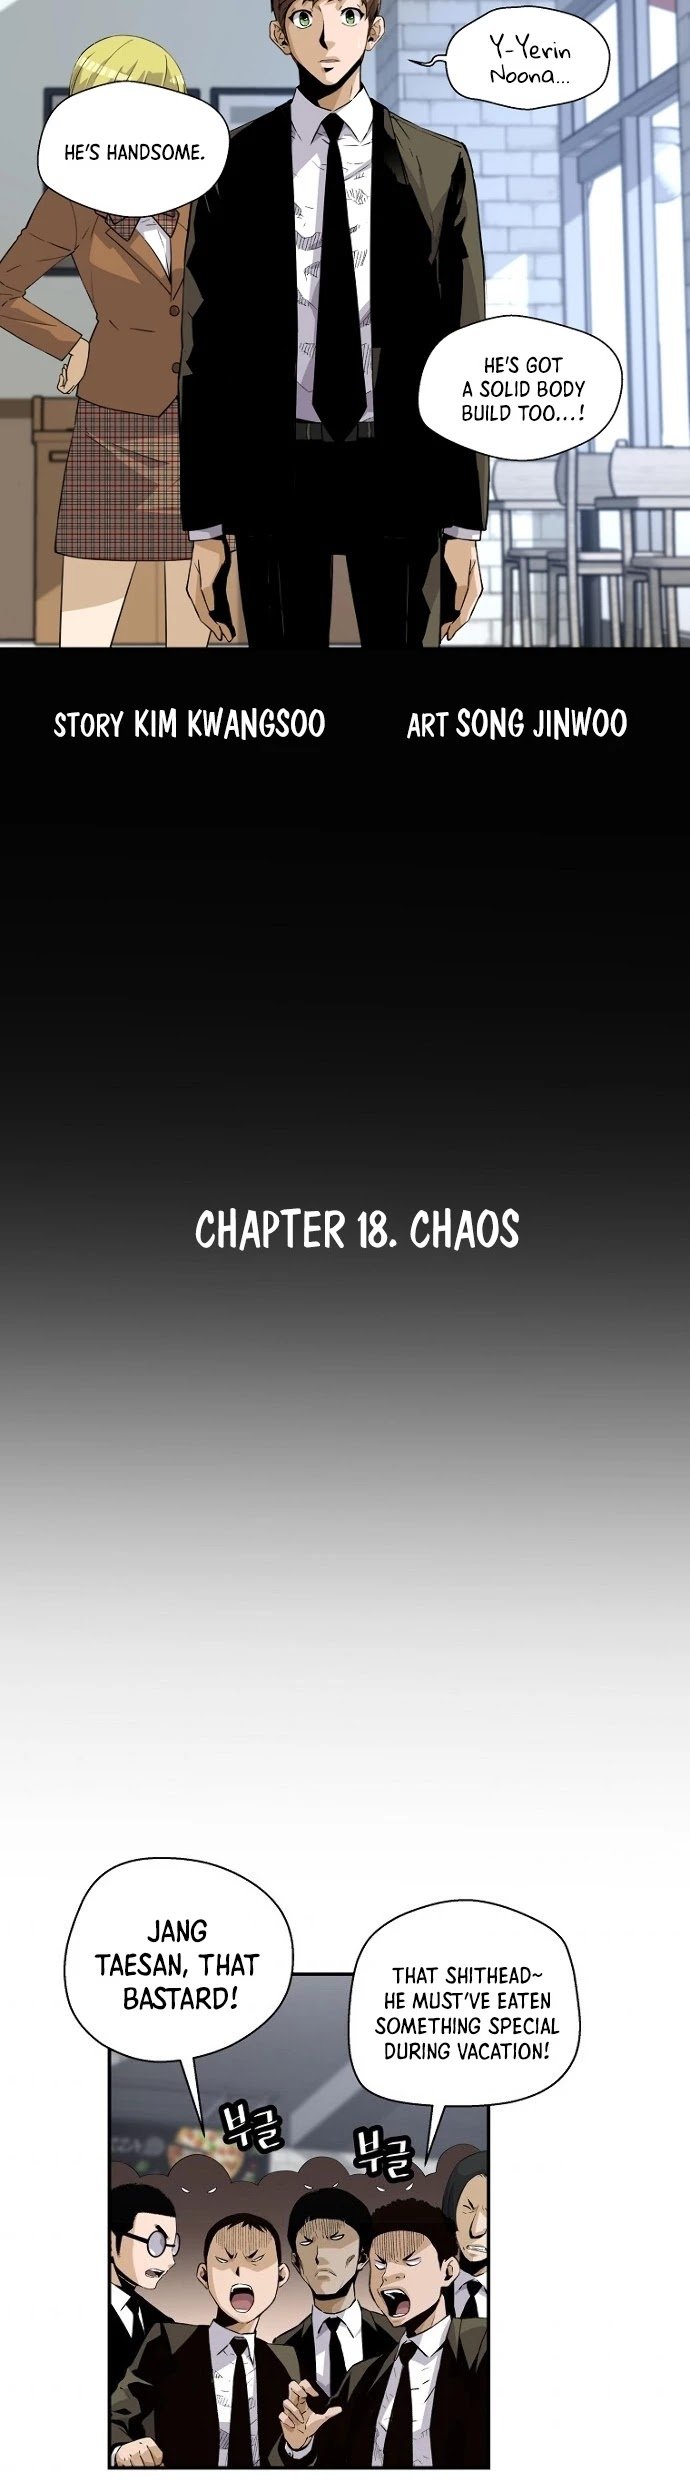 Return of the Legend chapter 18